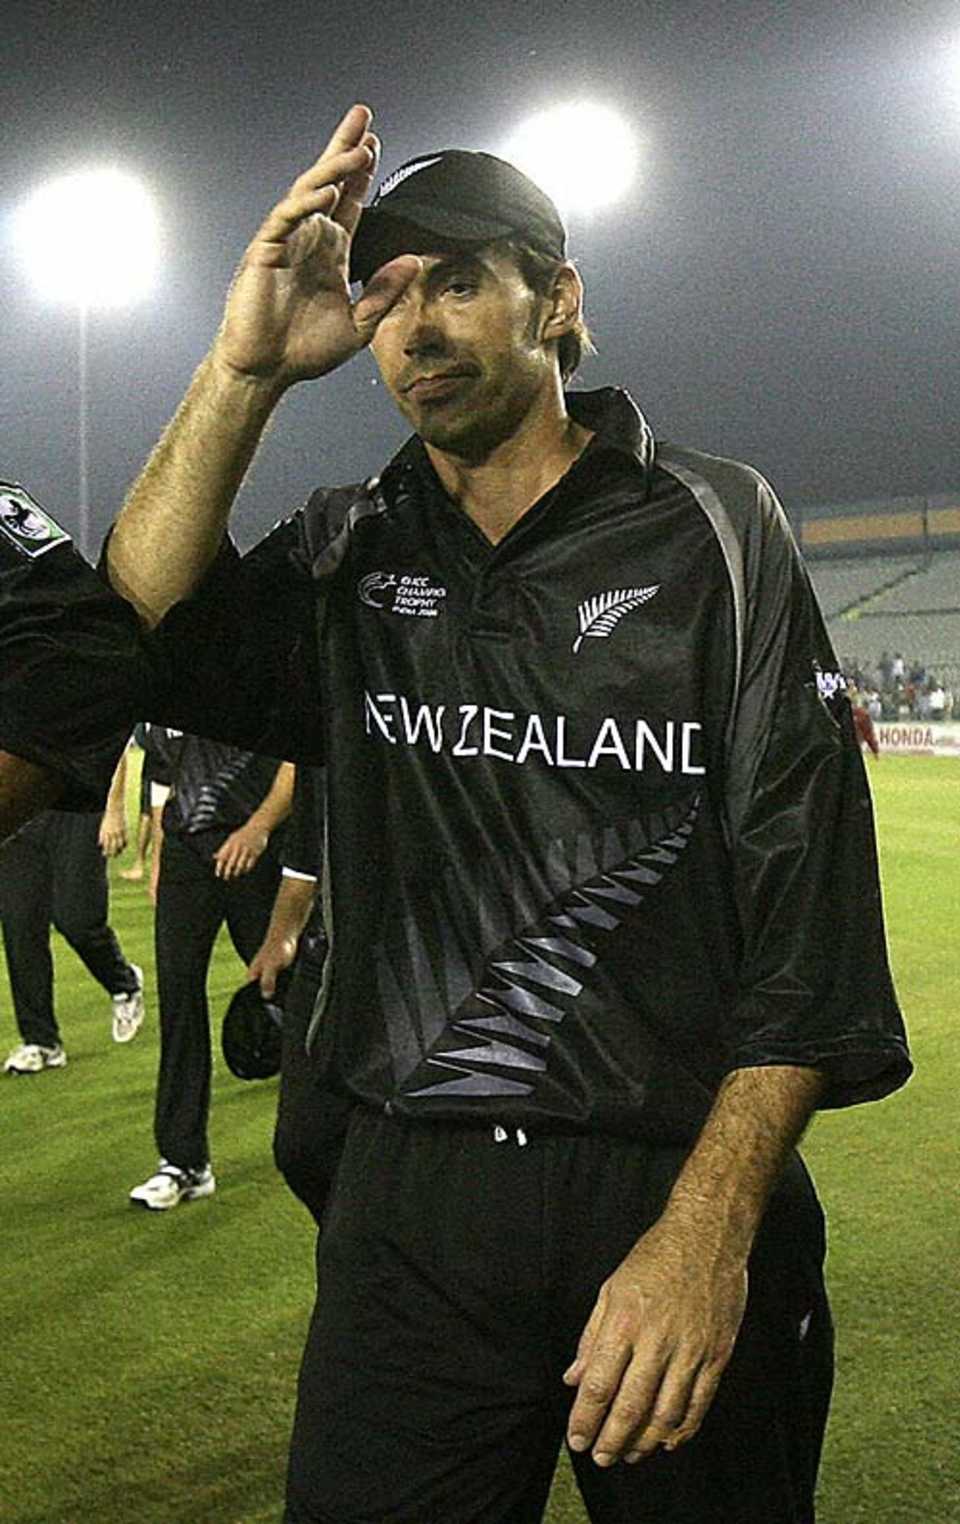 Stephen Fleming waves to the cameras after sealing victory for New Zealand